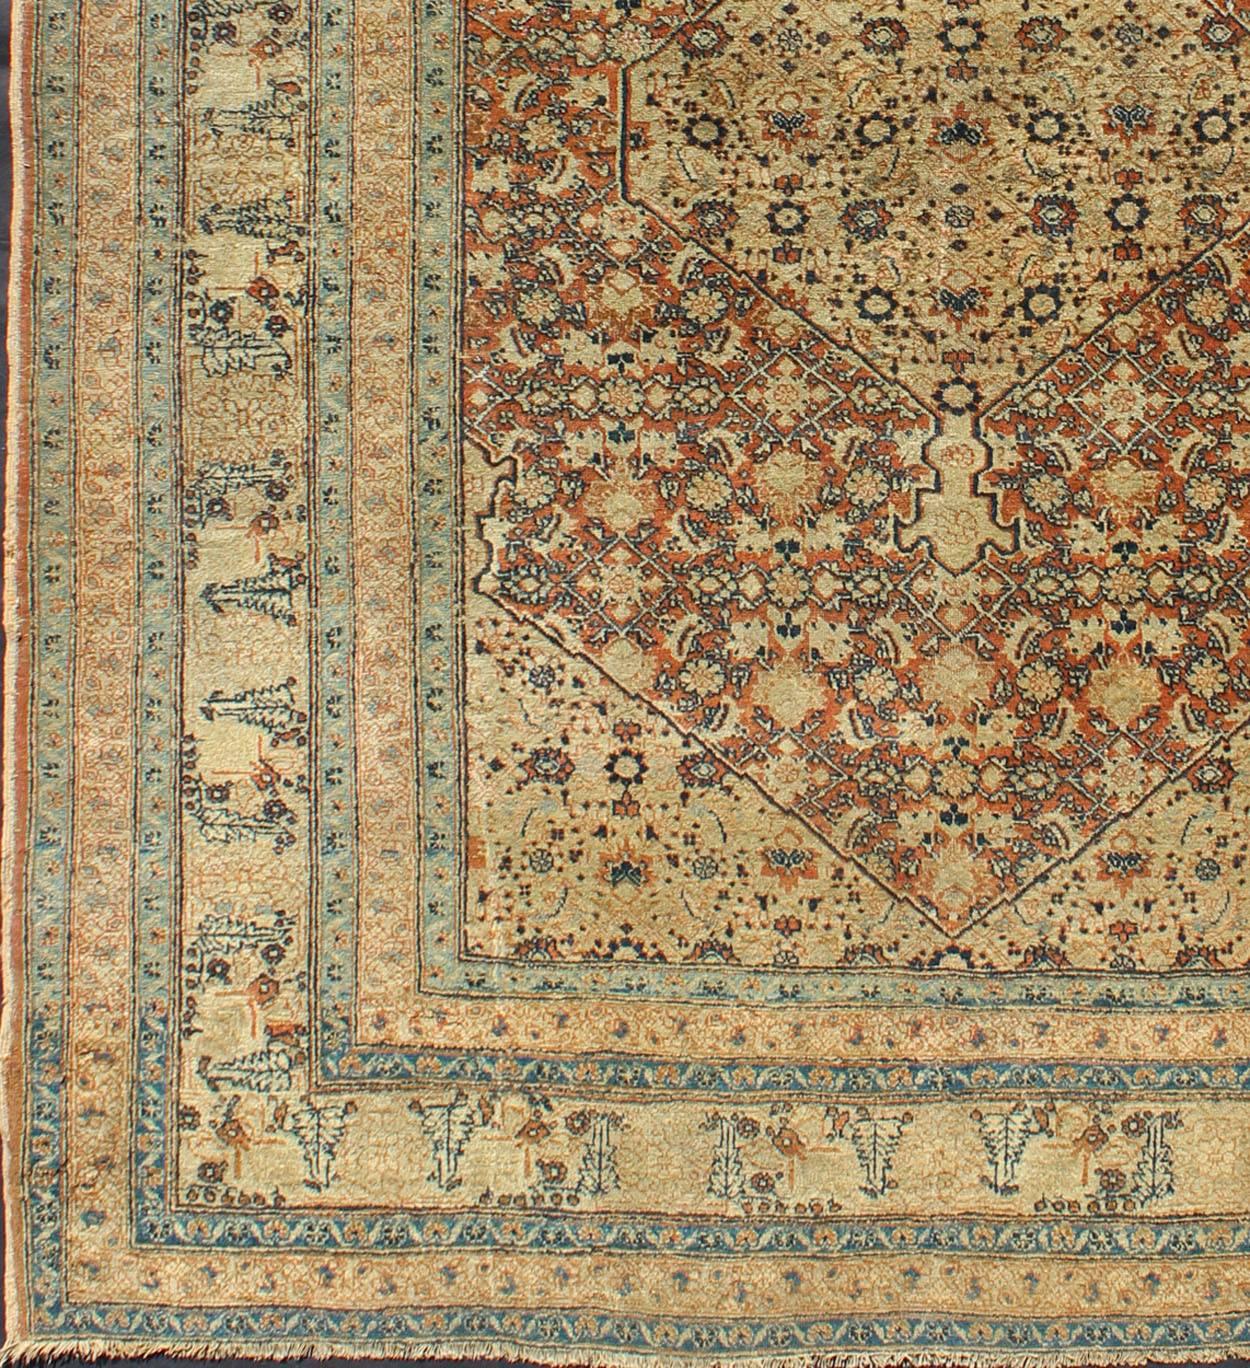 Antique Persian Tabriz Haj Jalili Fine Rug in Earth tones, Red Brown Background. CN-90801, 
This antique Persian Tabriz Haj Jalili rug features a sophisticated design and a unique color combination in Light cream and Persian blue and Herati design